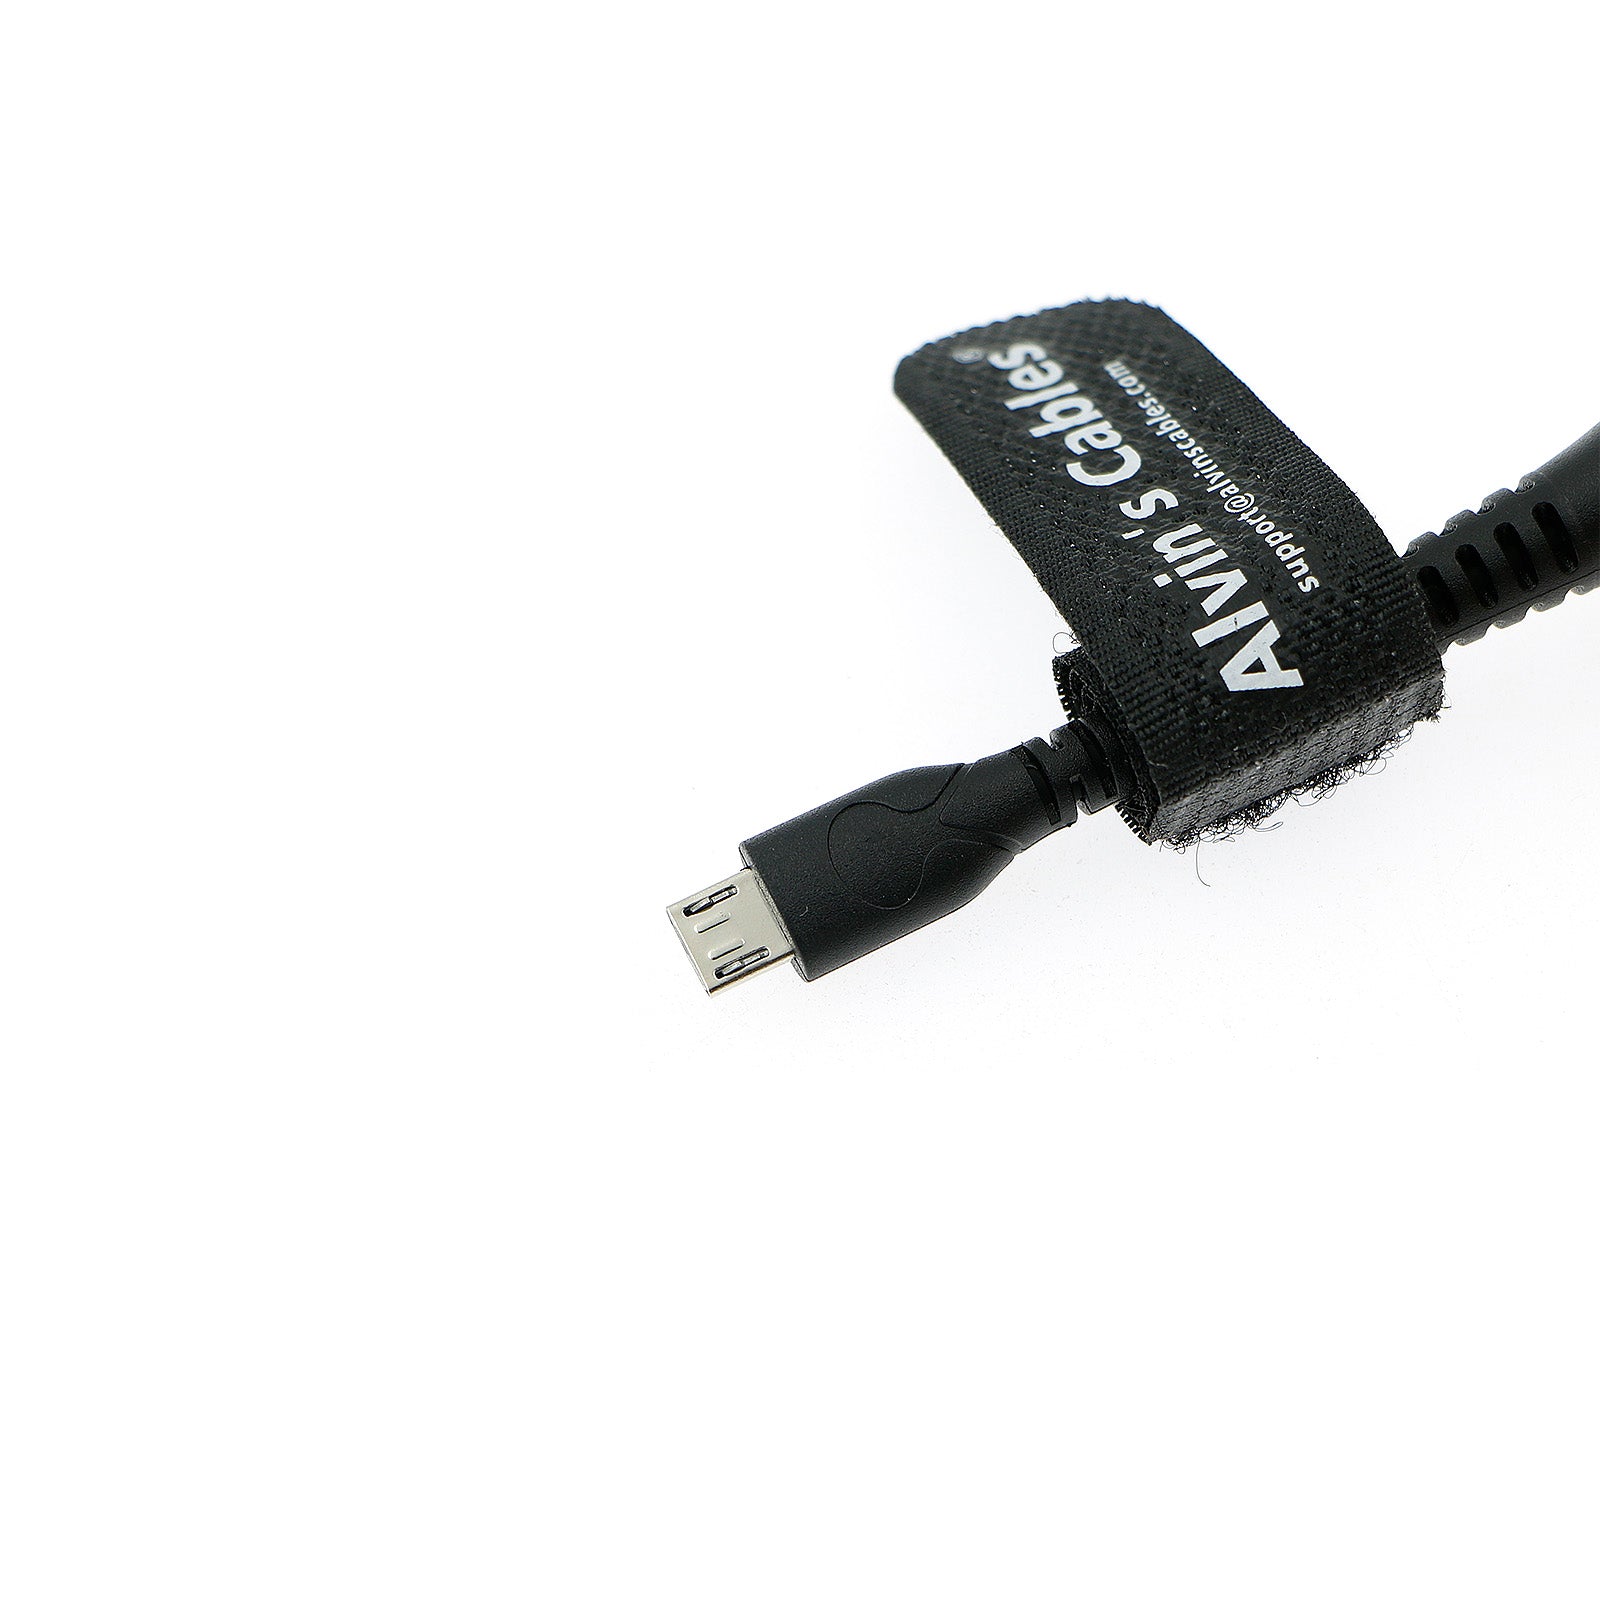 Alvin’s Cables 2.1mm DC Female to Micro USB Converter Adapter Power Cable 10cm| 3.9in